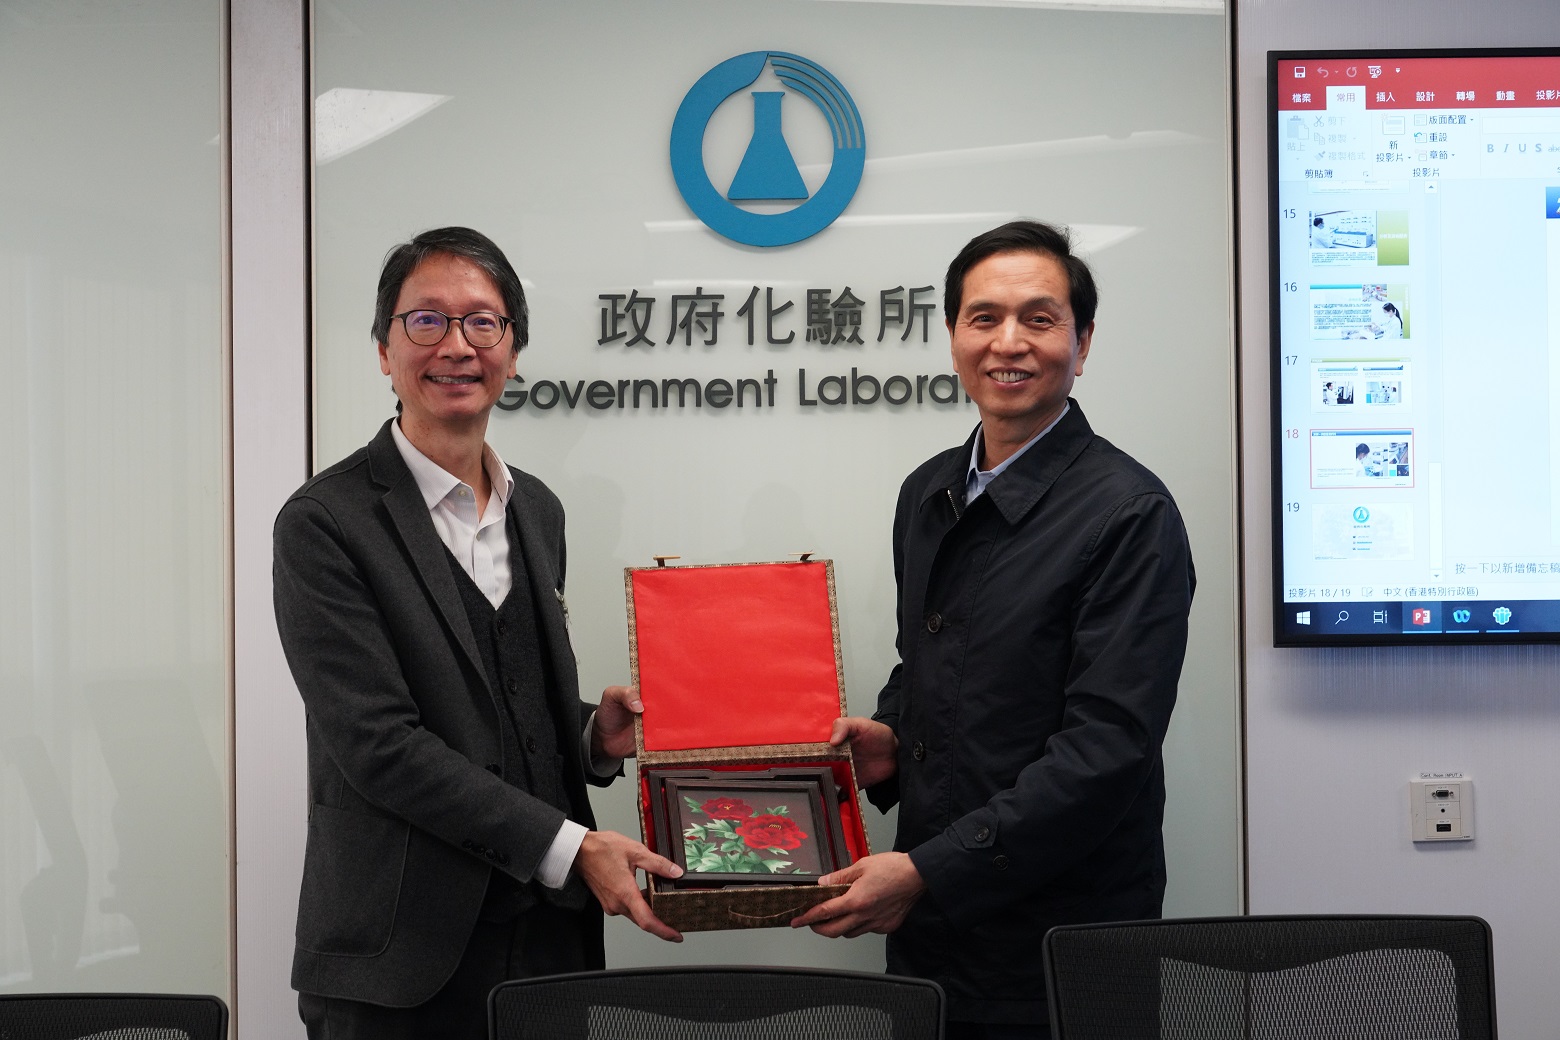 Deputy Director of the Narcotics Control Bureau, Ministry of Public Security, Mr. LAN Weihong (right) presents souvenir to Assistant Government Chemist(Forensic Science Division), Mr. CHEUNG Kwok-keung (left)